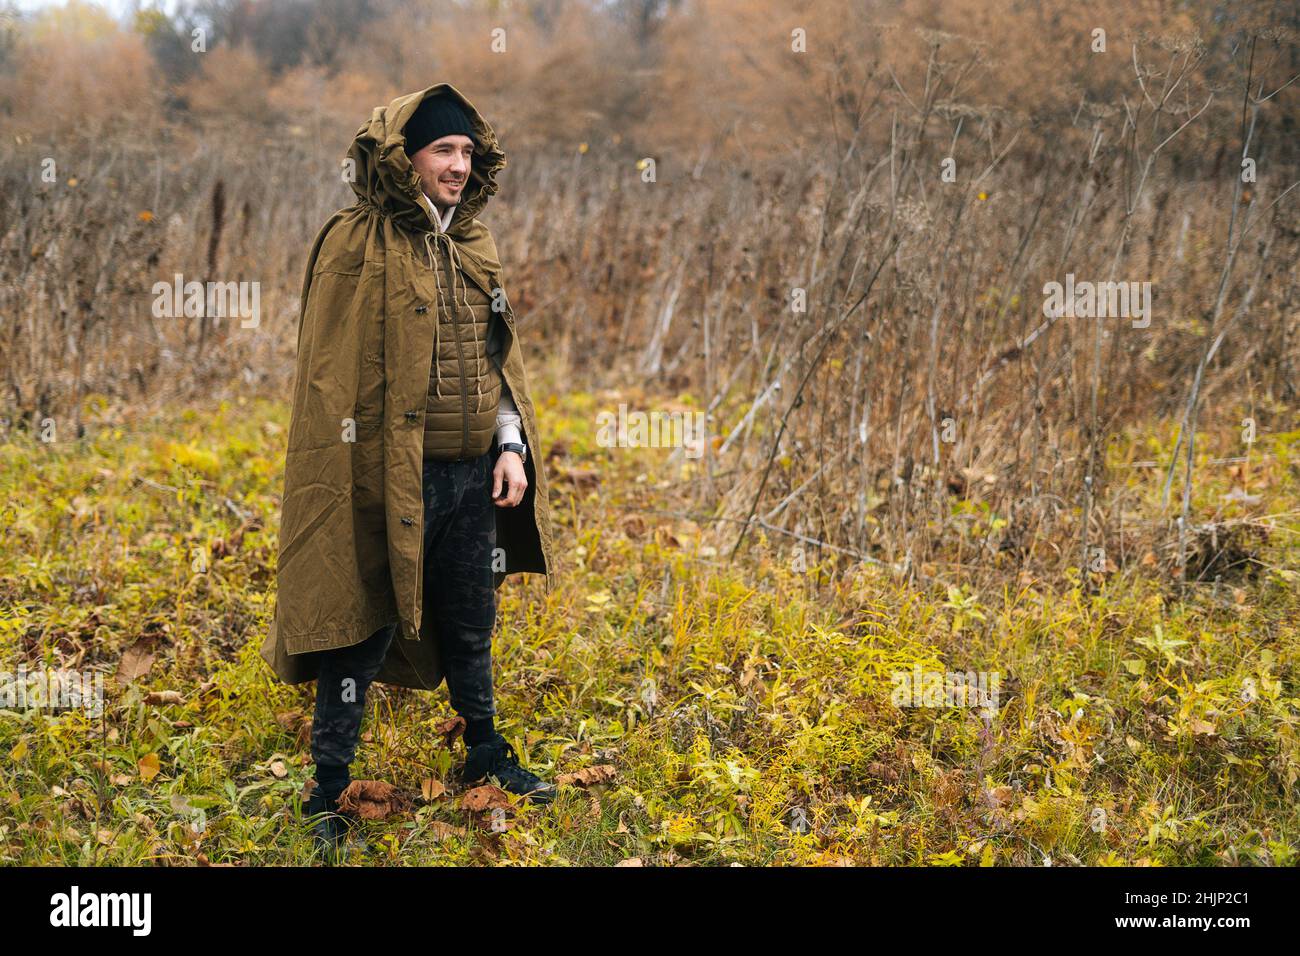 Portrait of smiling tourist man wearing green raincoat tent standing in thicket of bushes in cold overcast day and looking away. Stock Photo